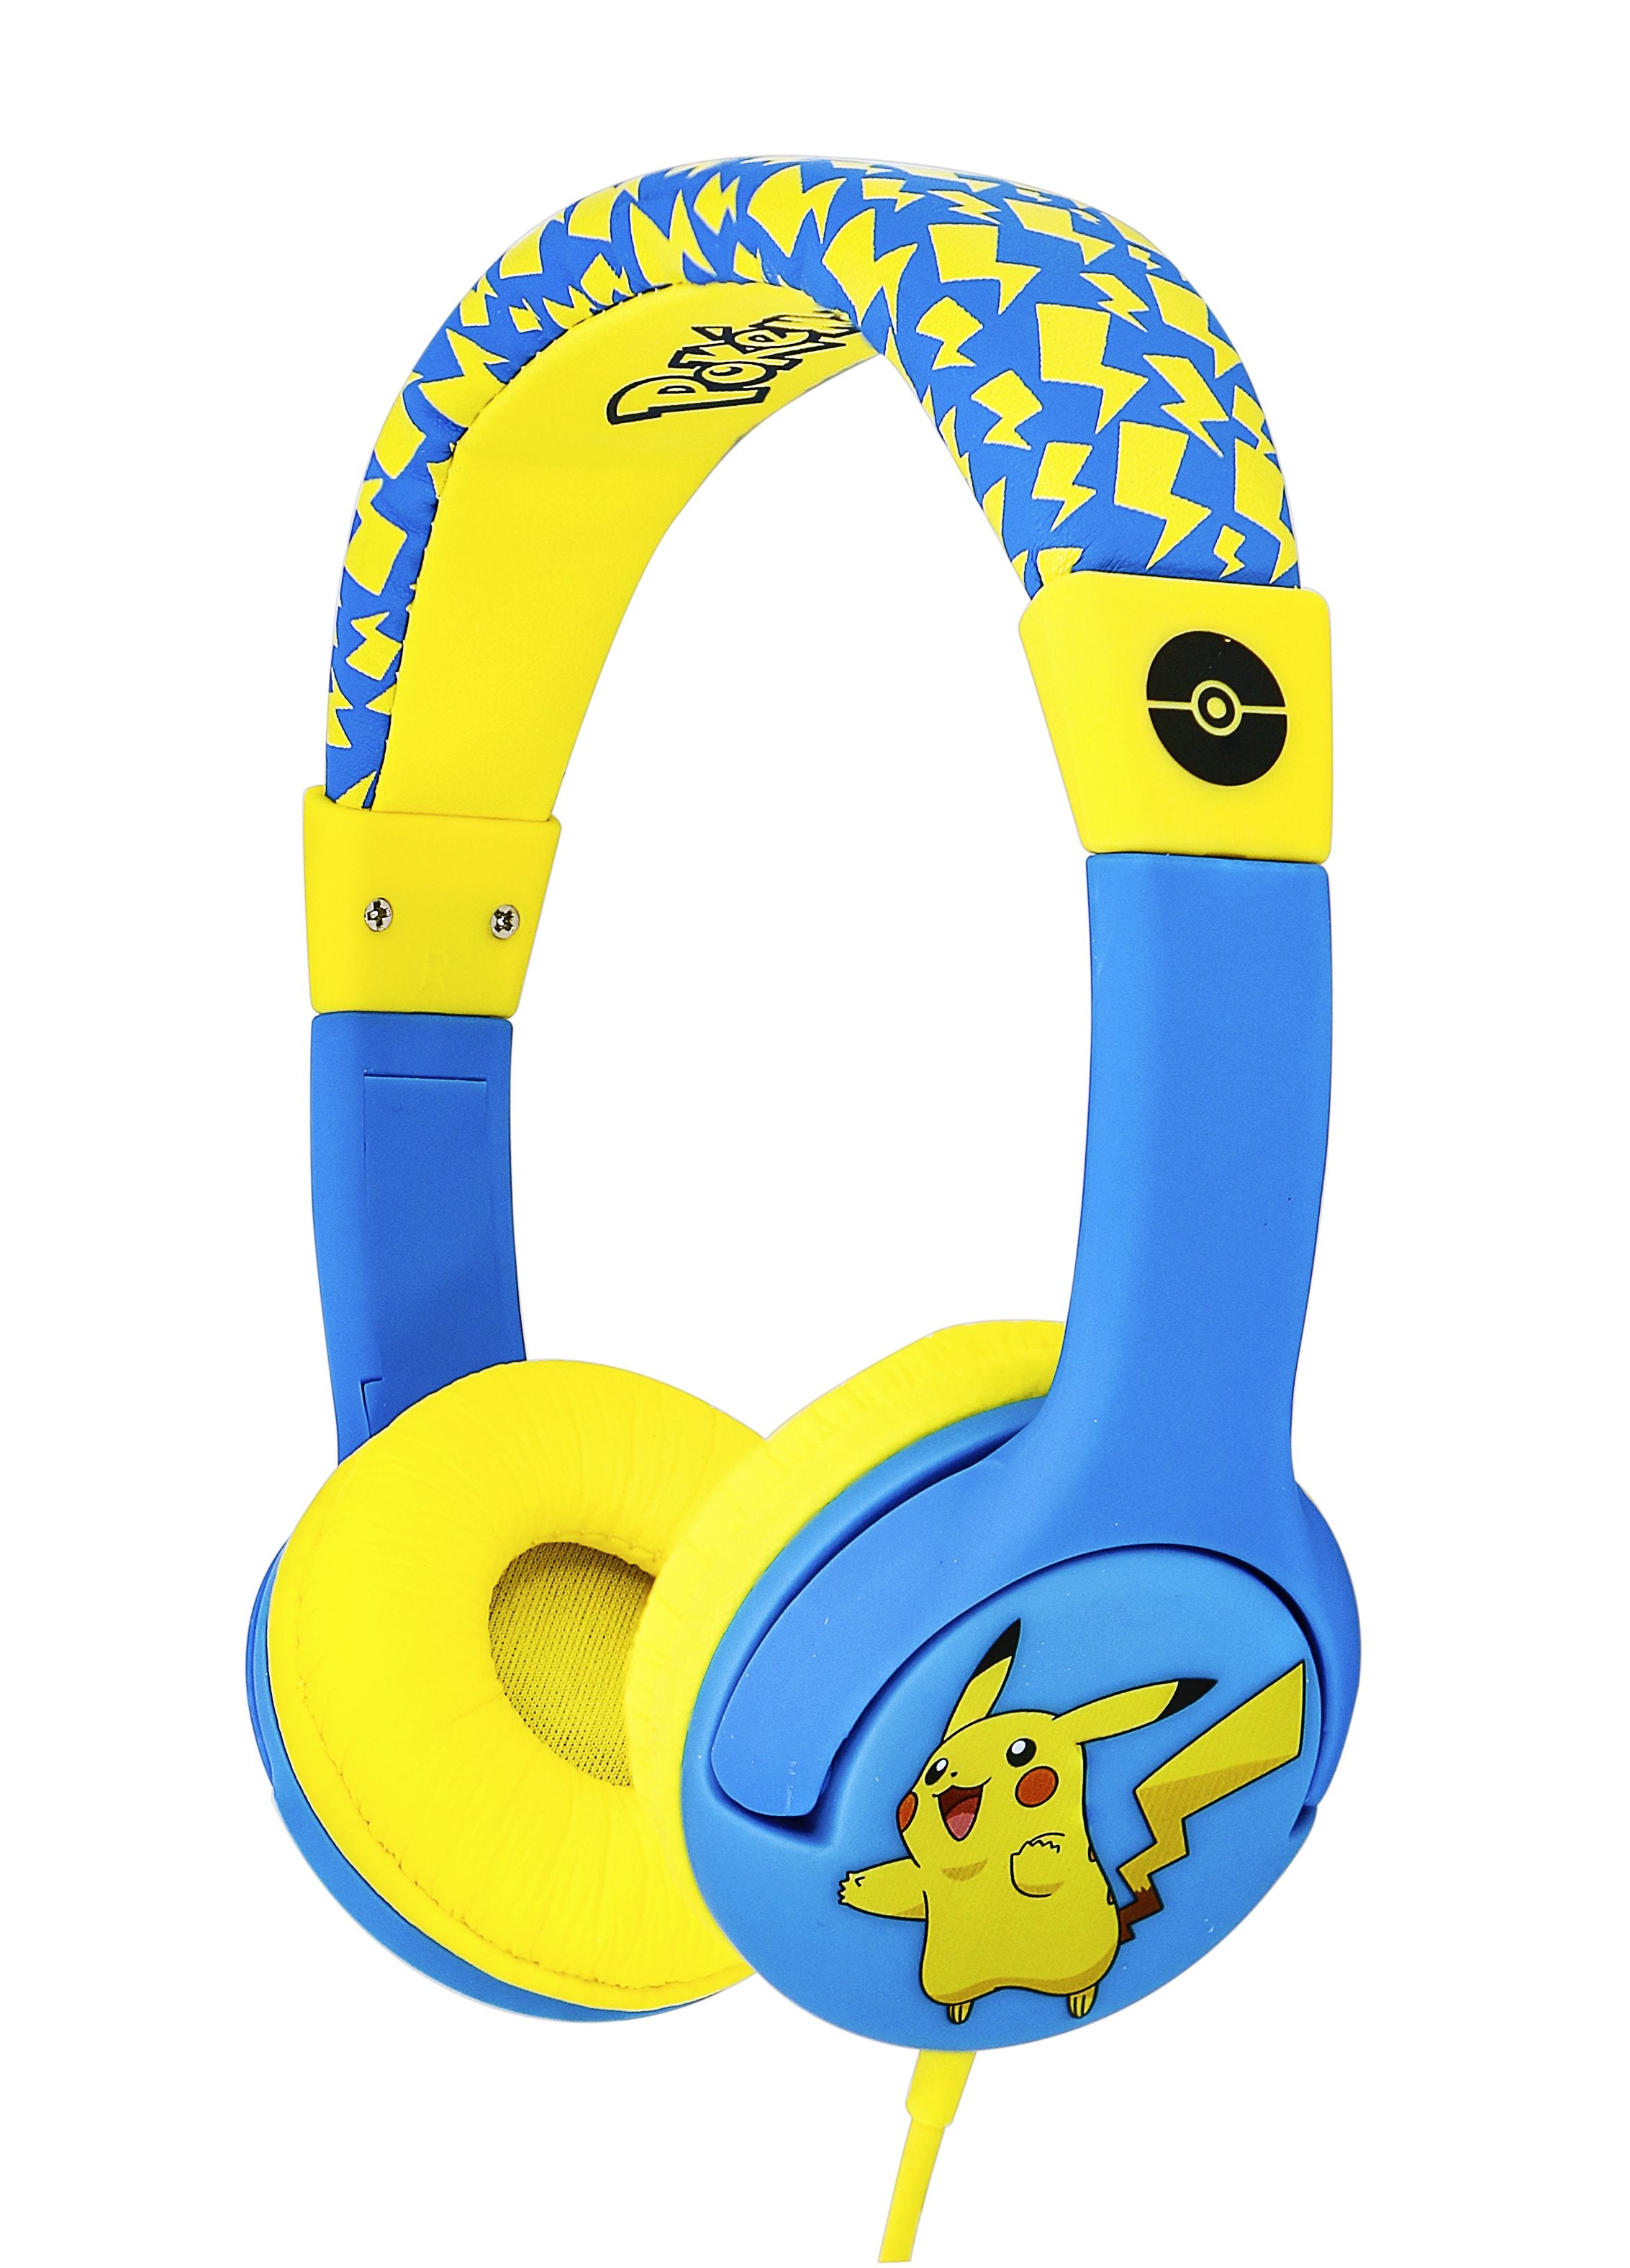 OTL Pokemon OnEar Wired Headphone - Safe Volume Limiting @85dB, Foldable & Adjustable, Superb Sound Quality,  Works w/ Smartphones, Tablets, Ninetendo Switch, Laptops & devices w/ 3.5mm port - Pikachu